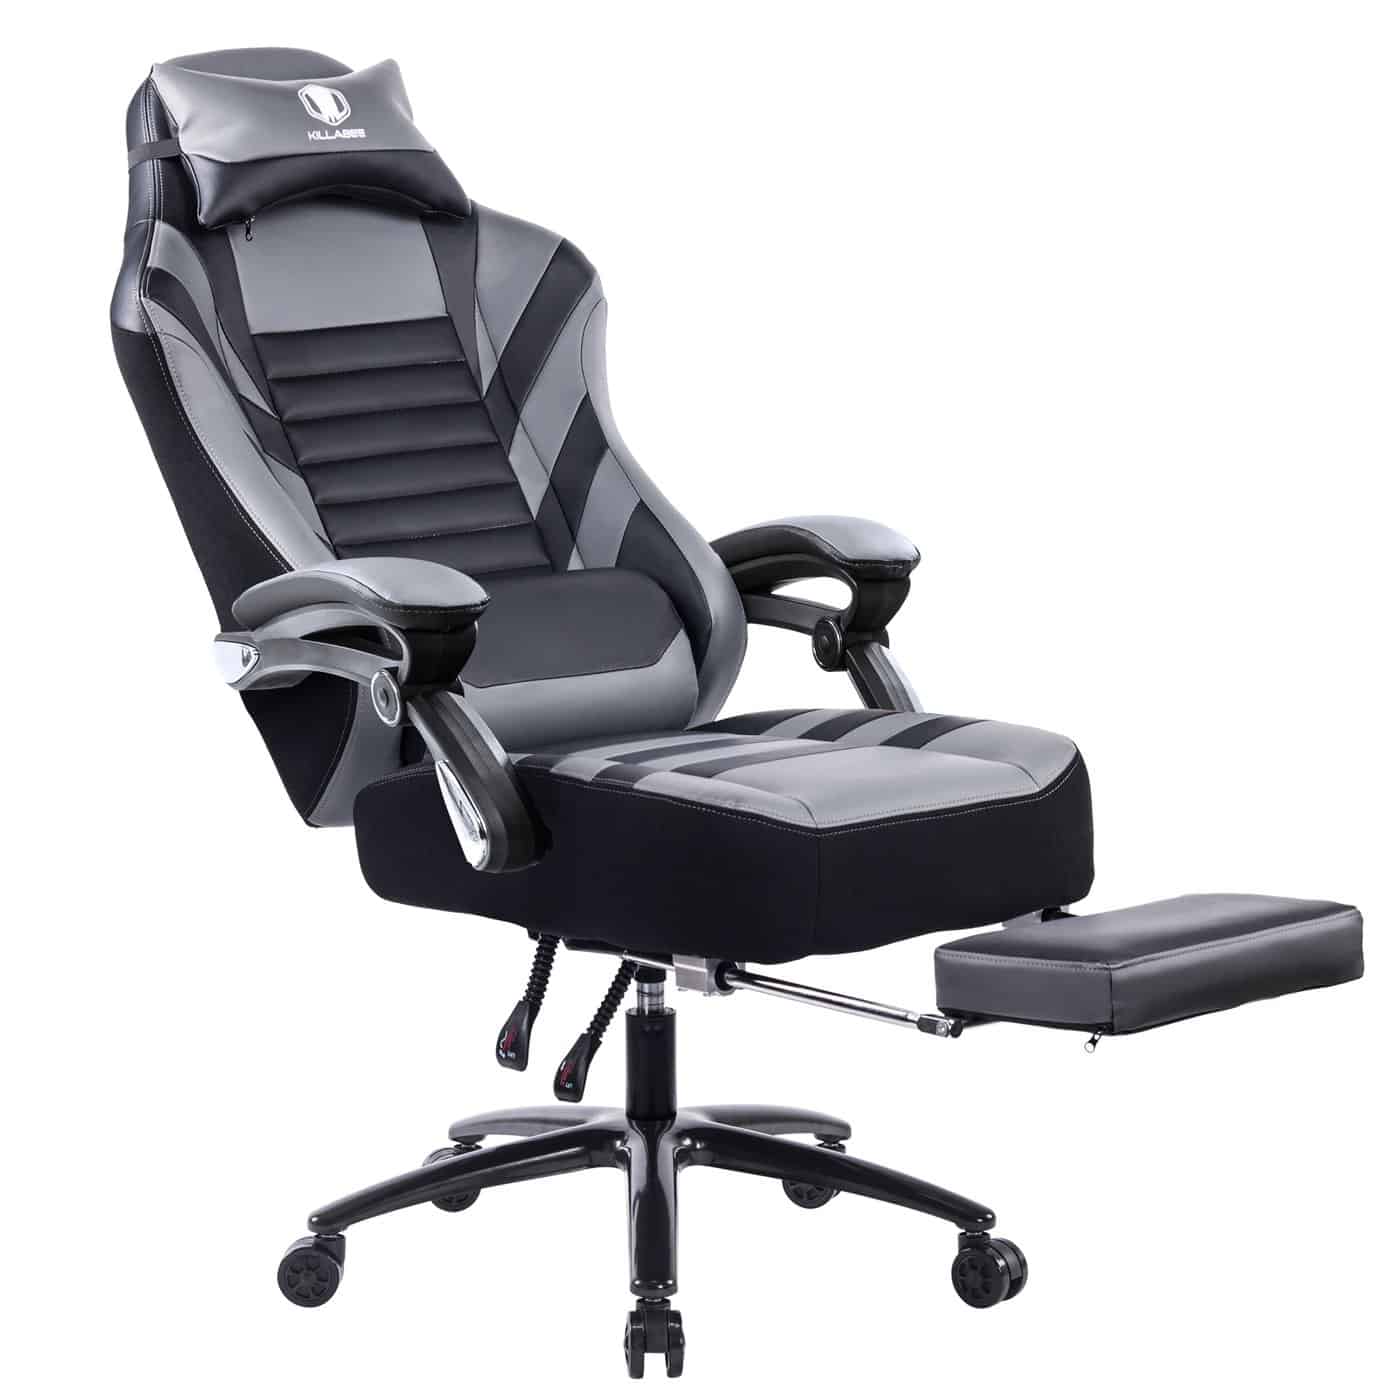 Gaming Chair For Back Pain - Best Gaming Chair For Back Pain And Better